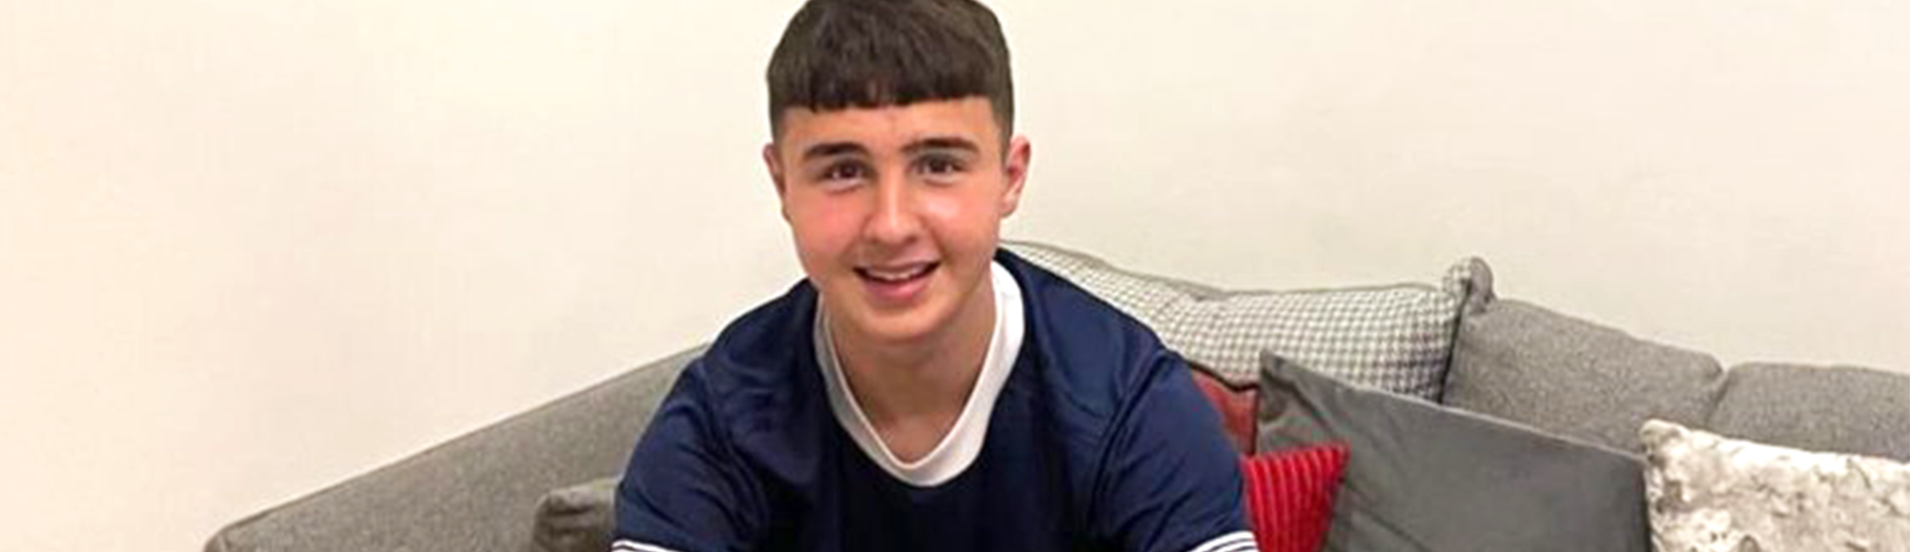 Teenager launches Scotland Euro 2024 ticket raffle to fundraise for Caudwell Children